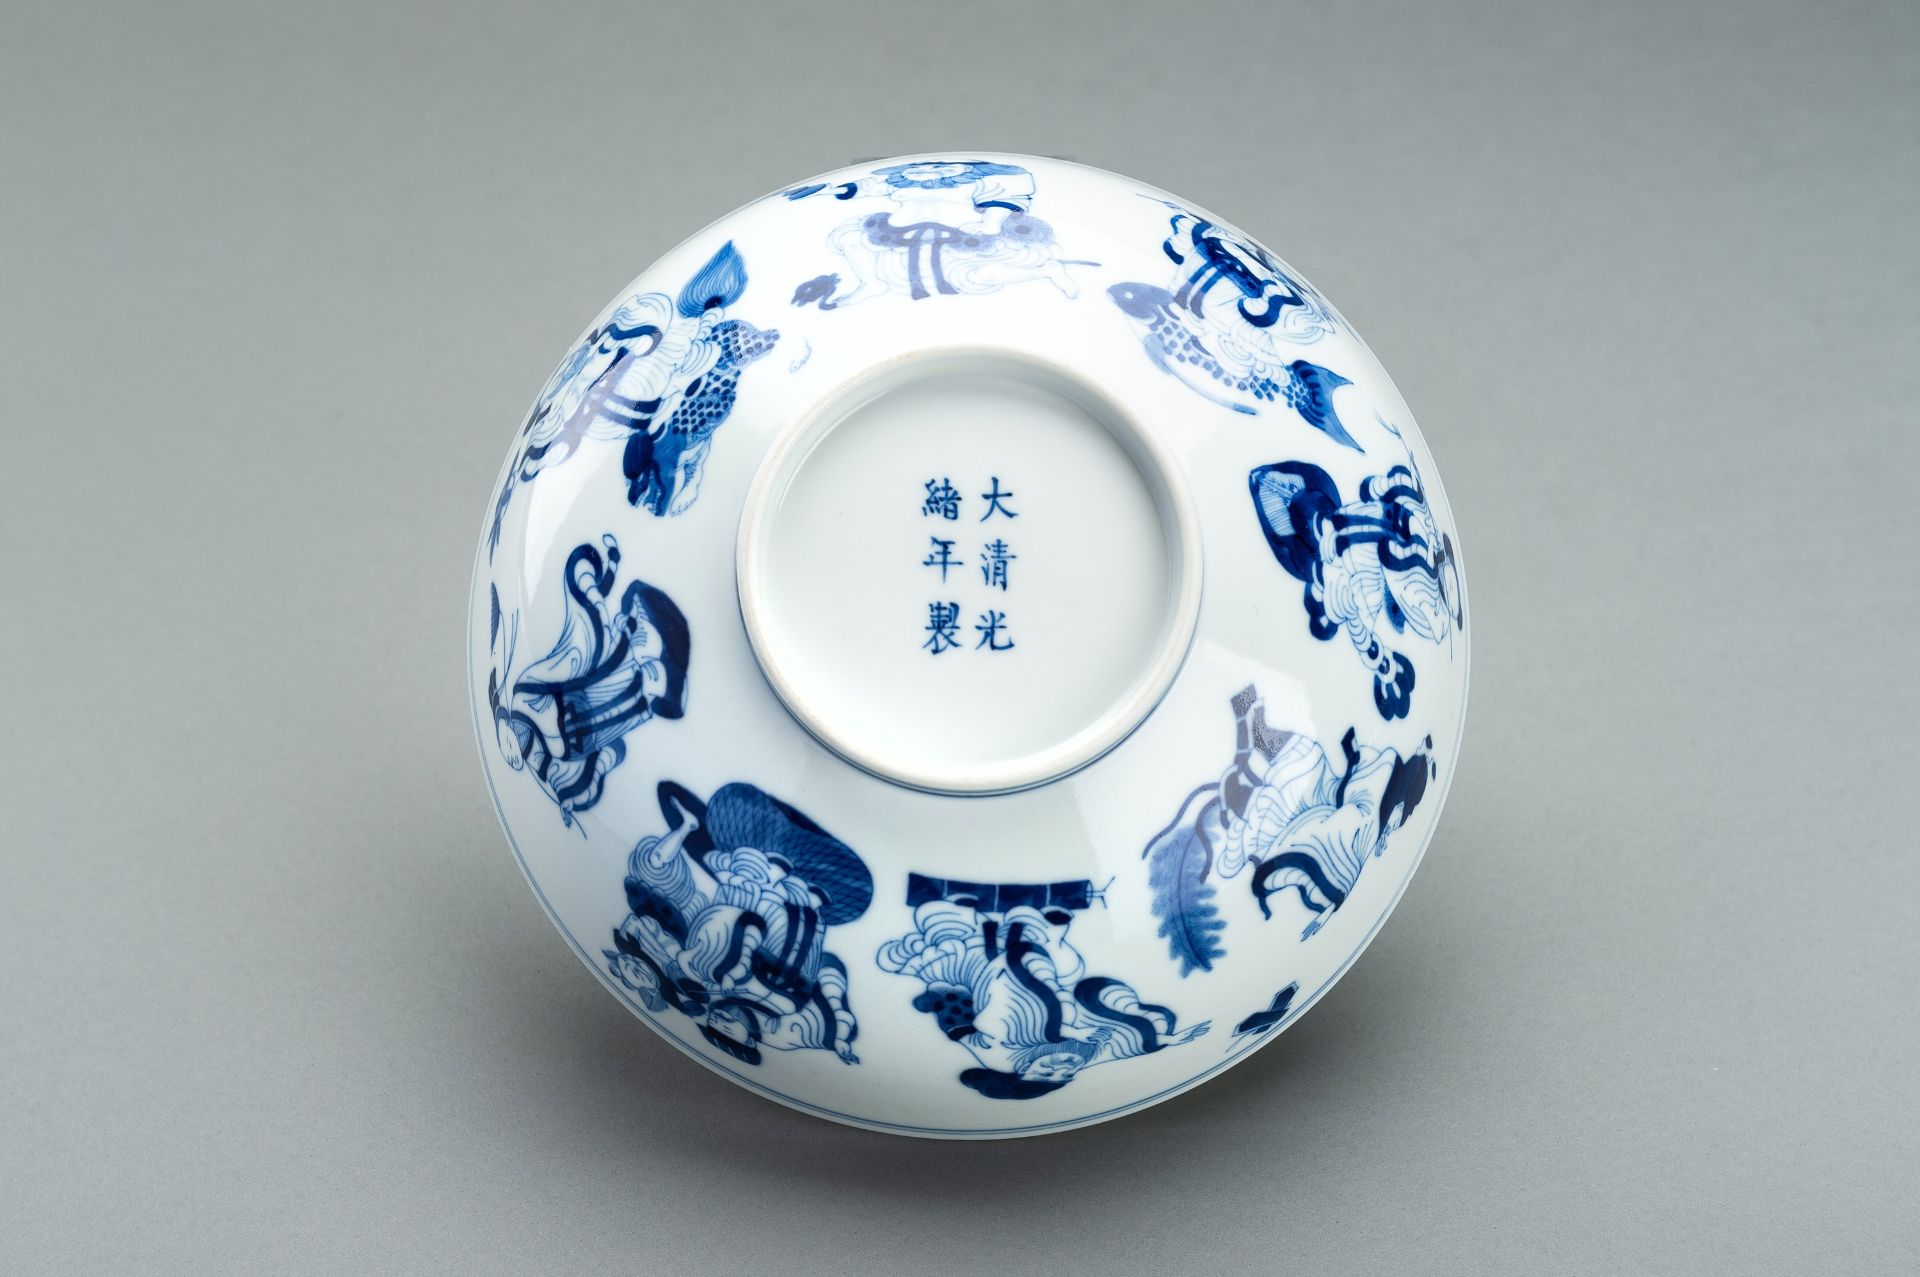 A BLUE AND WHITE PORCELAIN 'EIGHT IMMORTALS' BOWL, GUANGXU MARK AND PERIOD